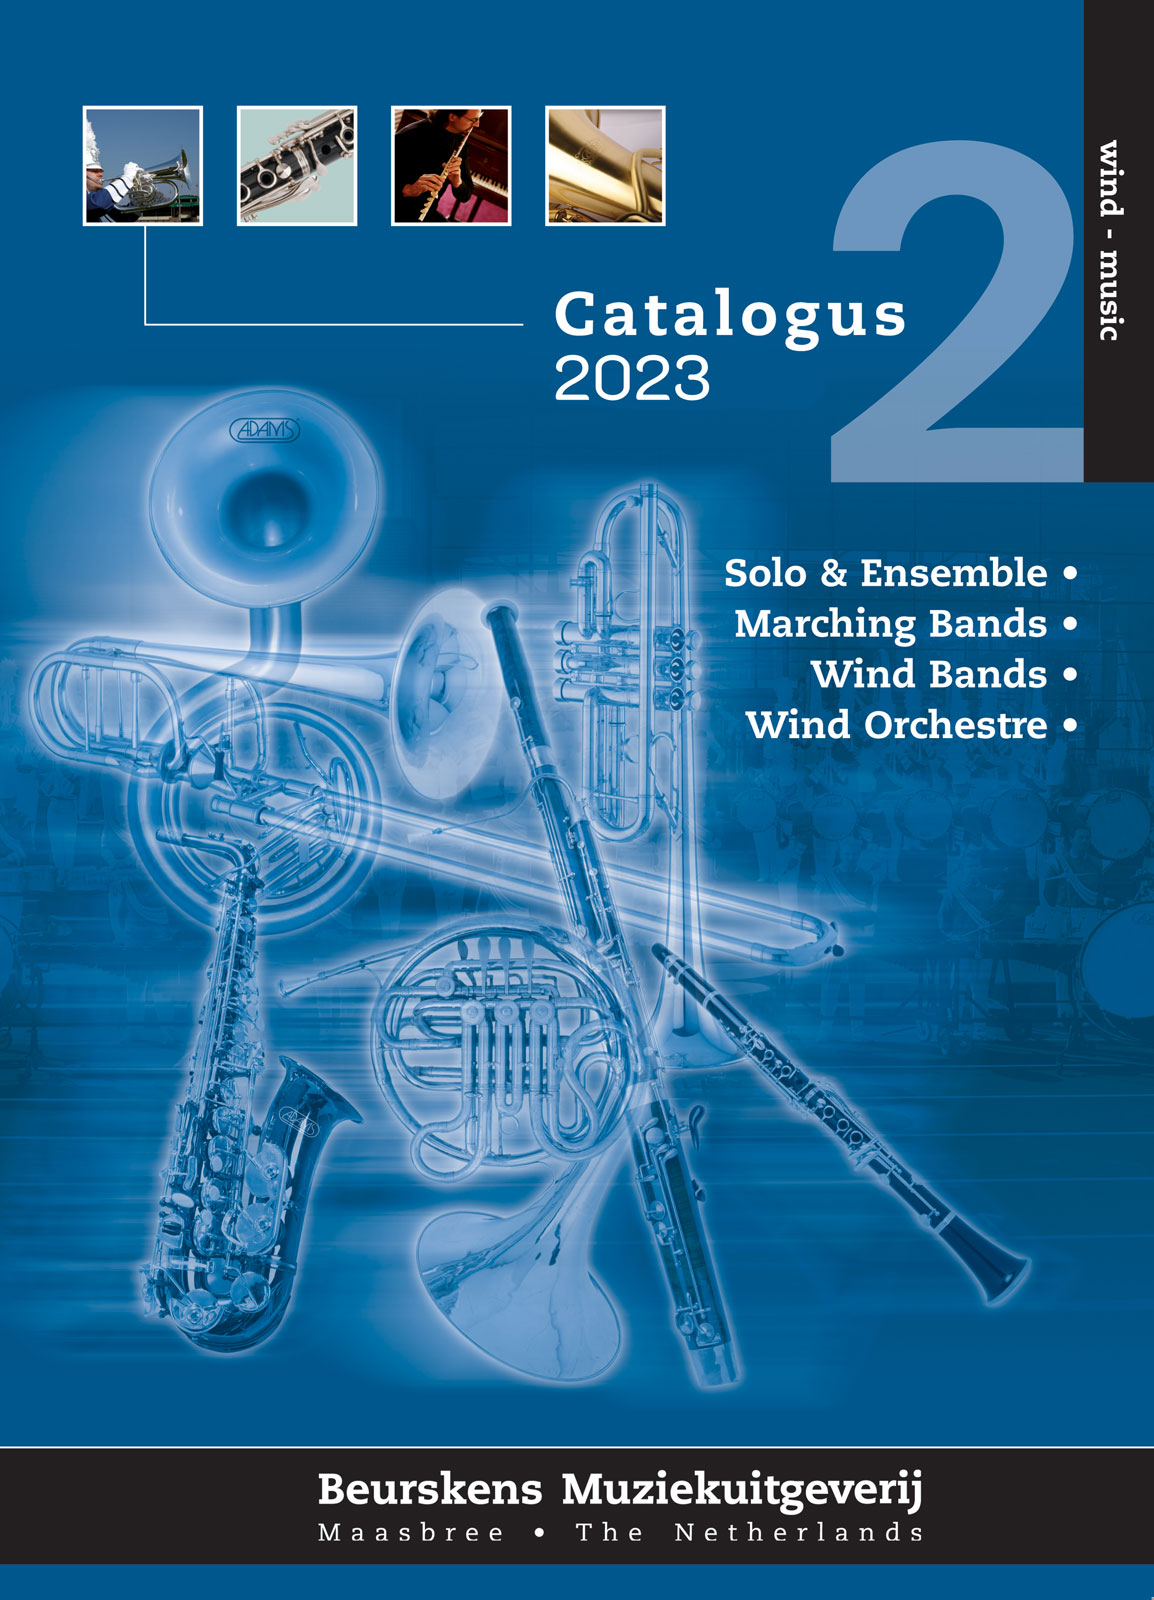 beurskens-catalogus-front-2021-1